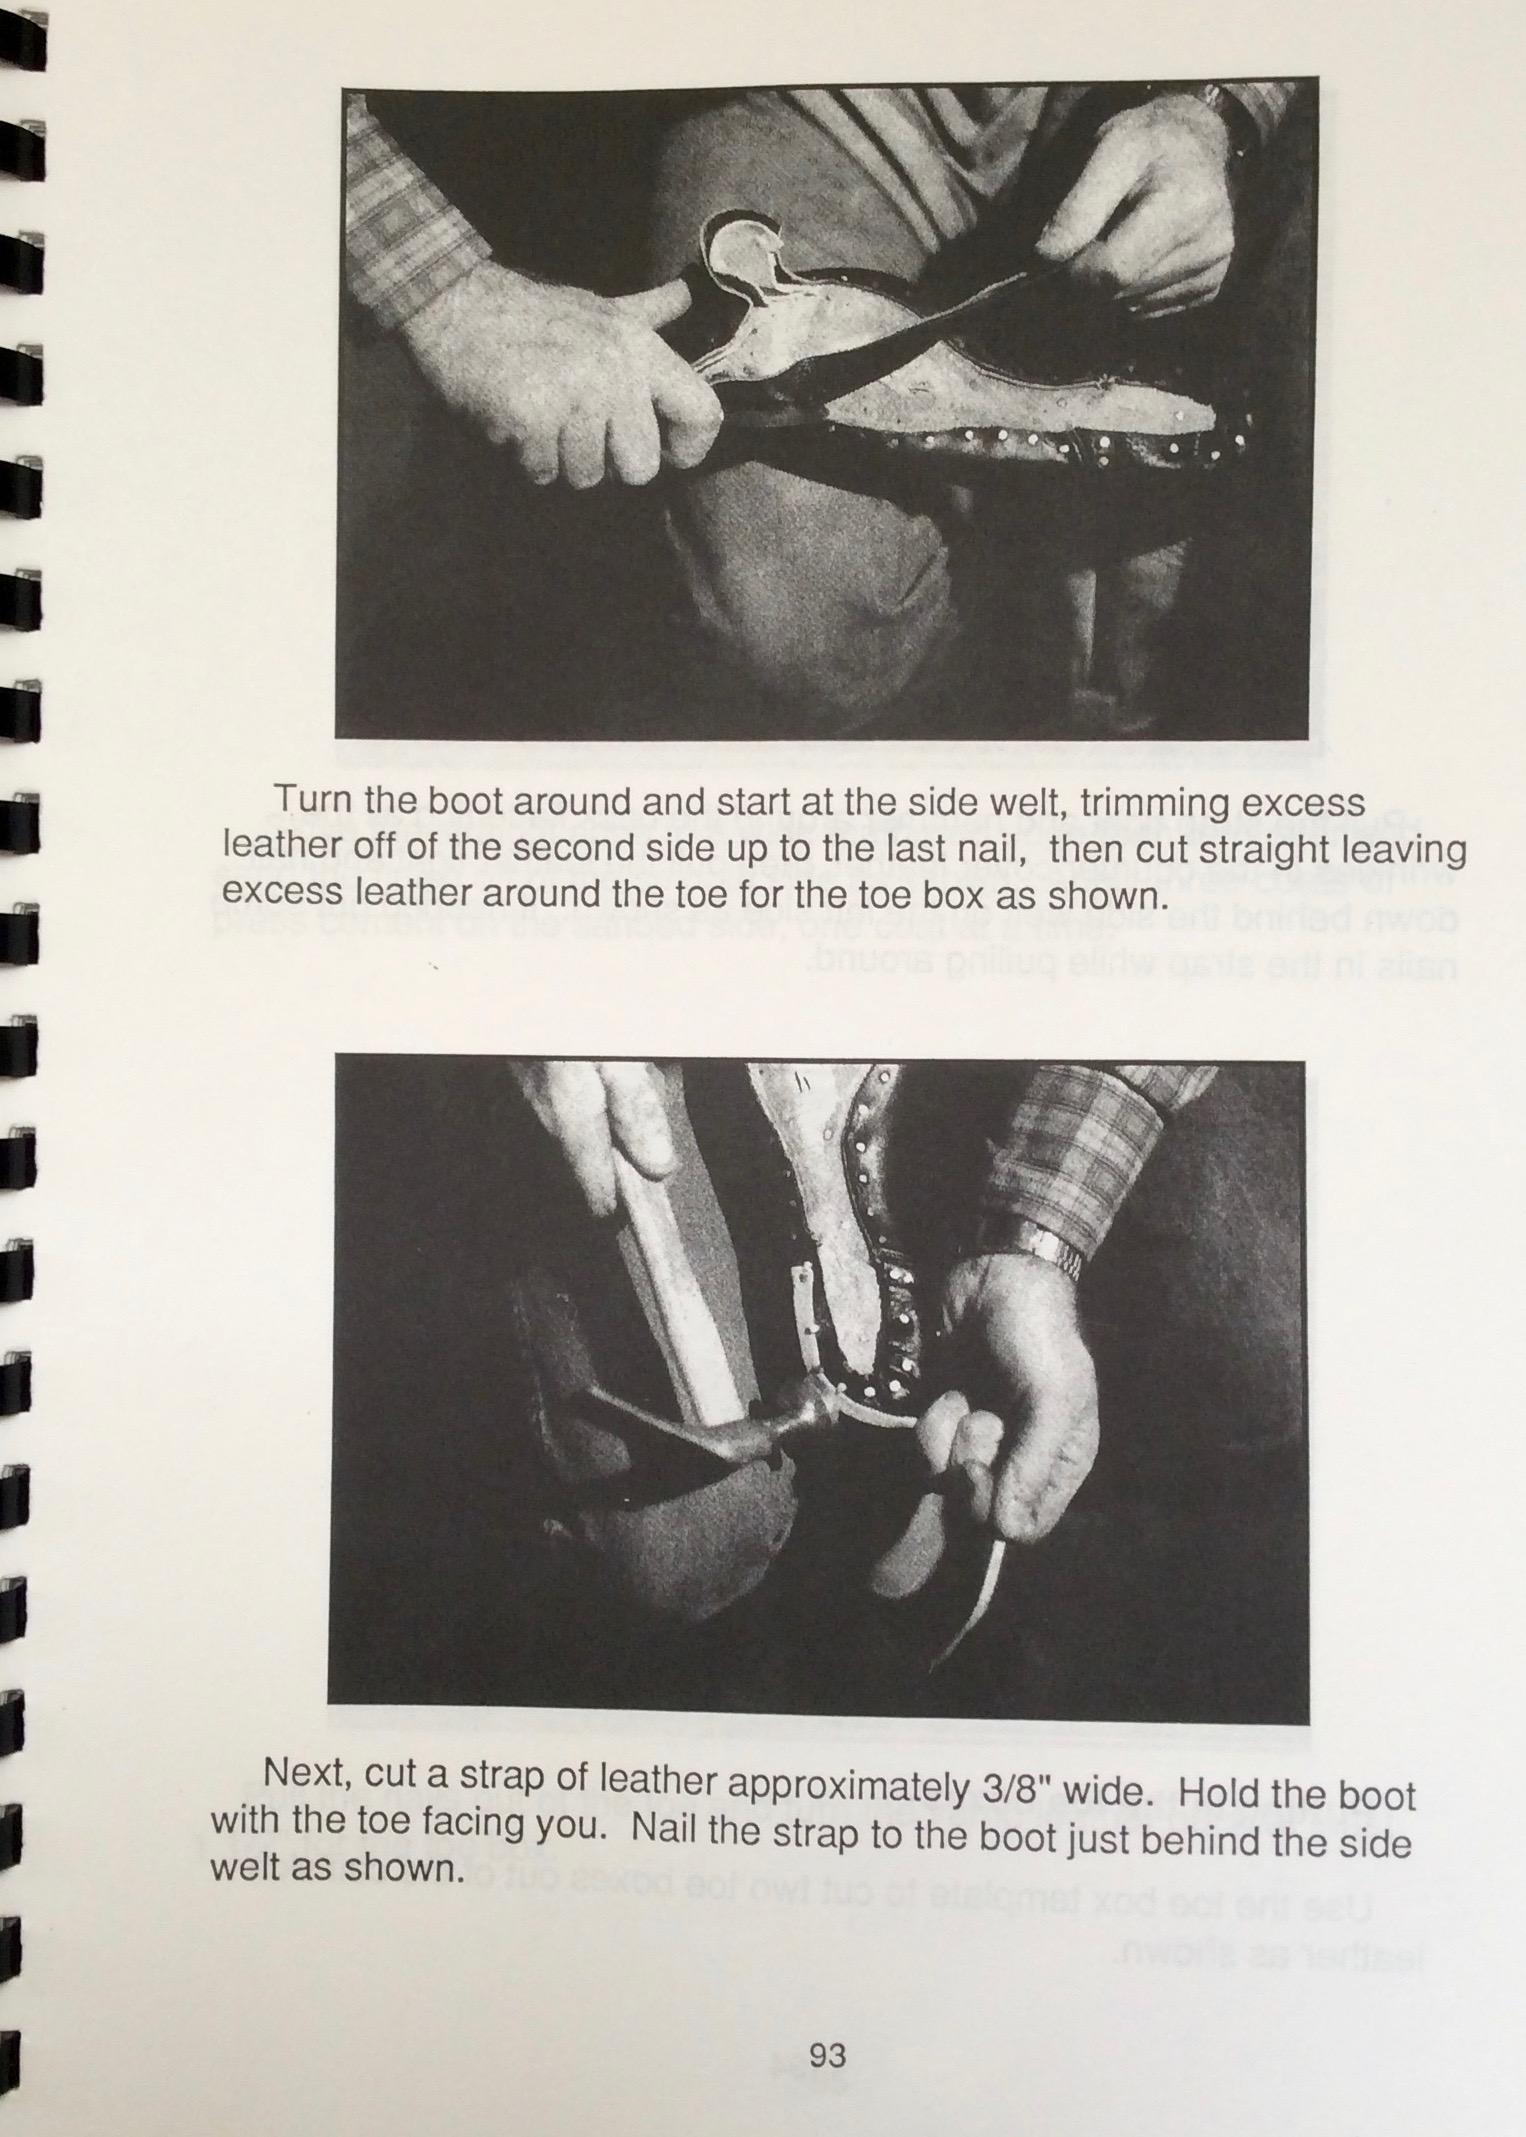 How to Make a Western Boots. Excerpt.